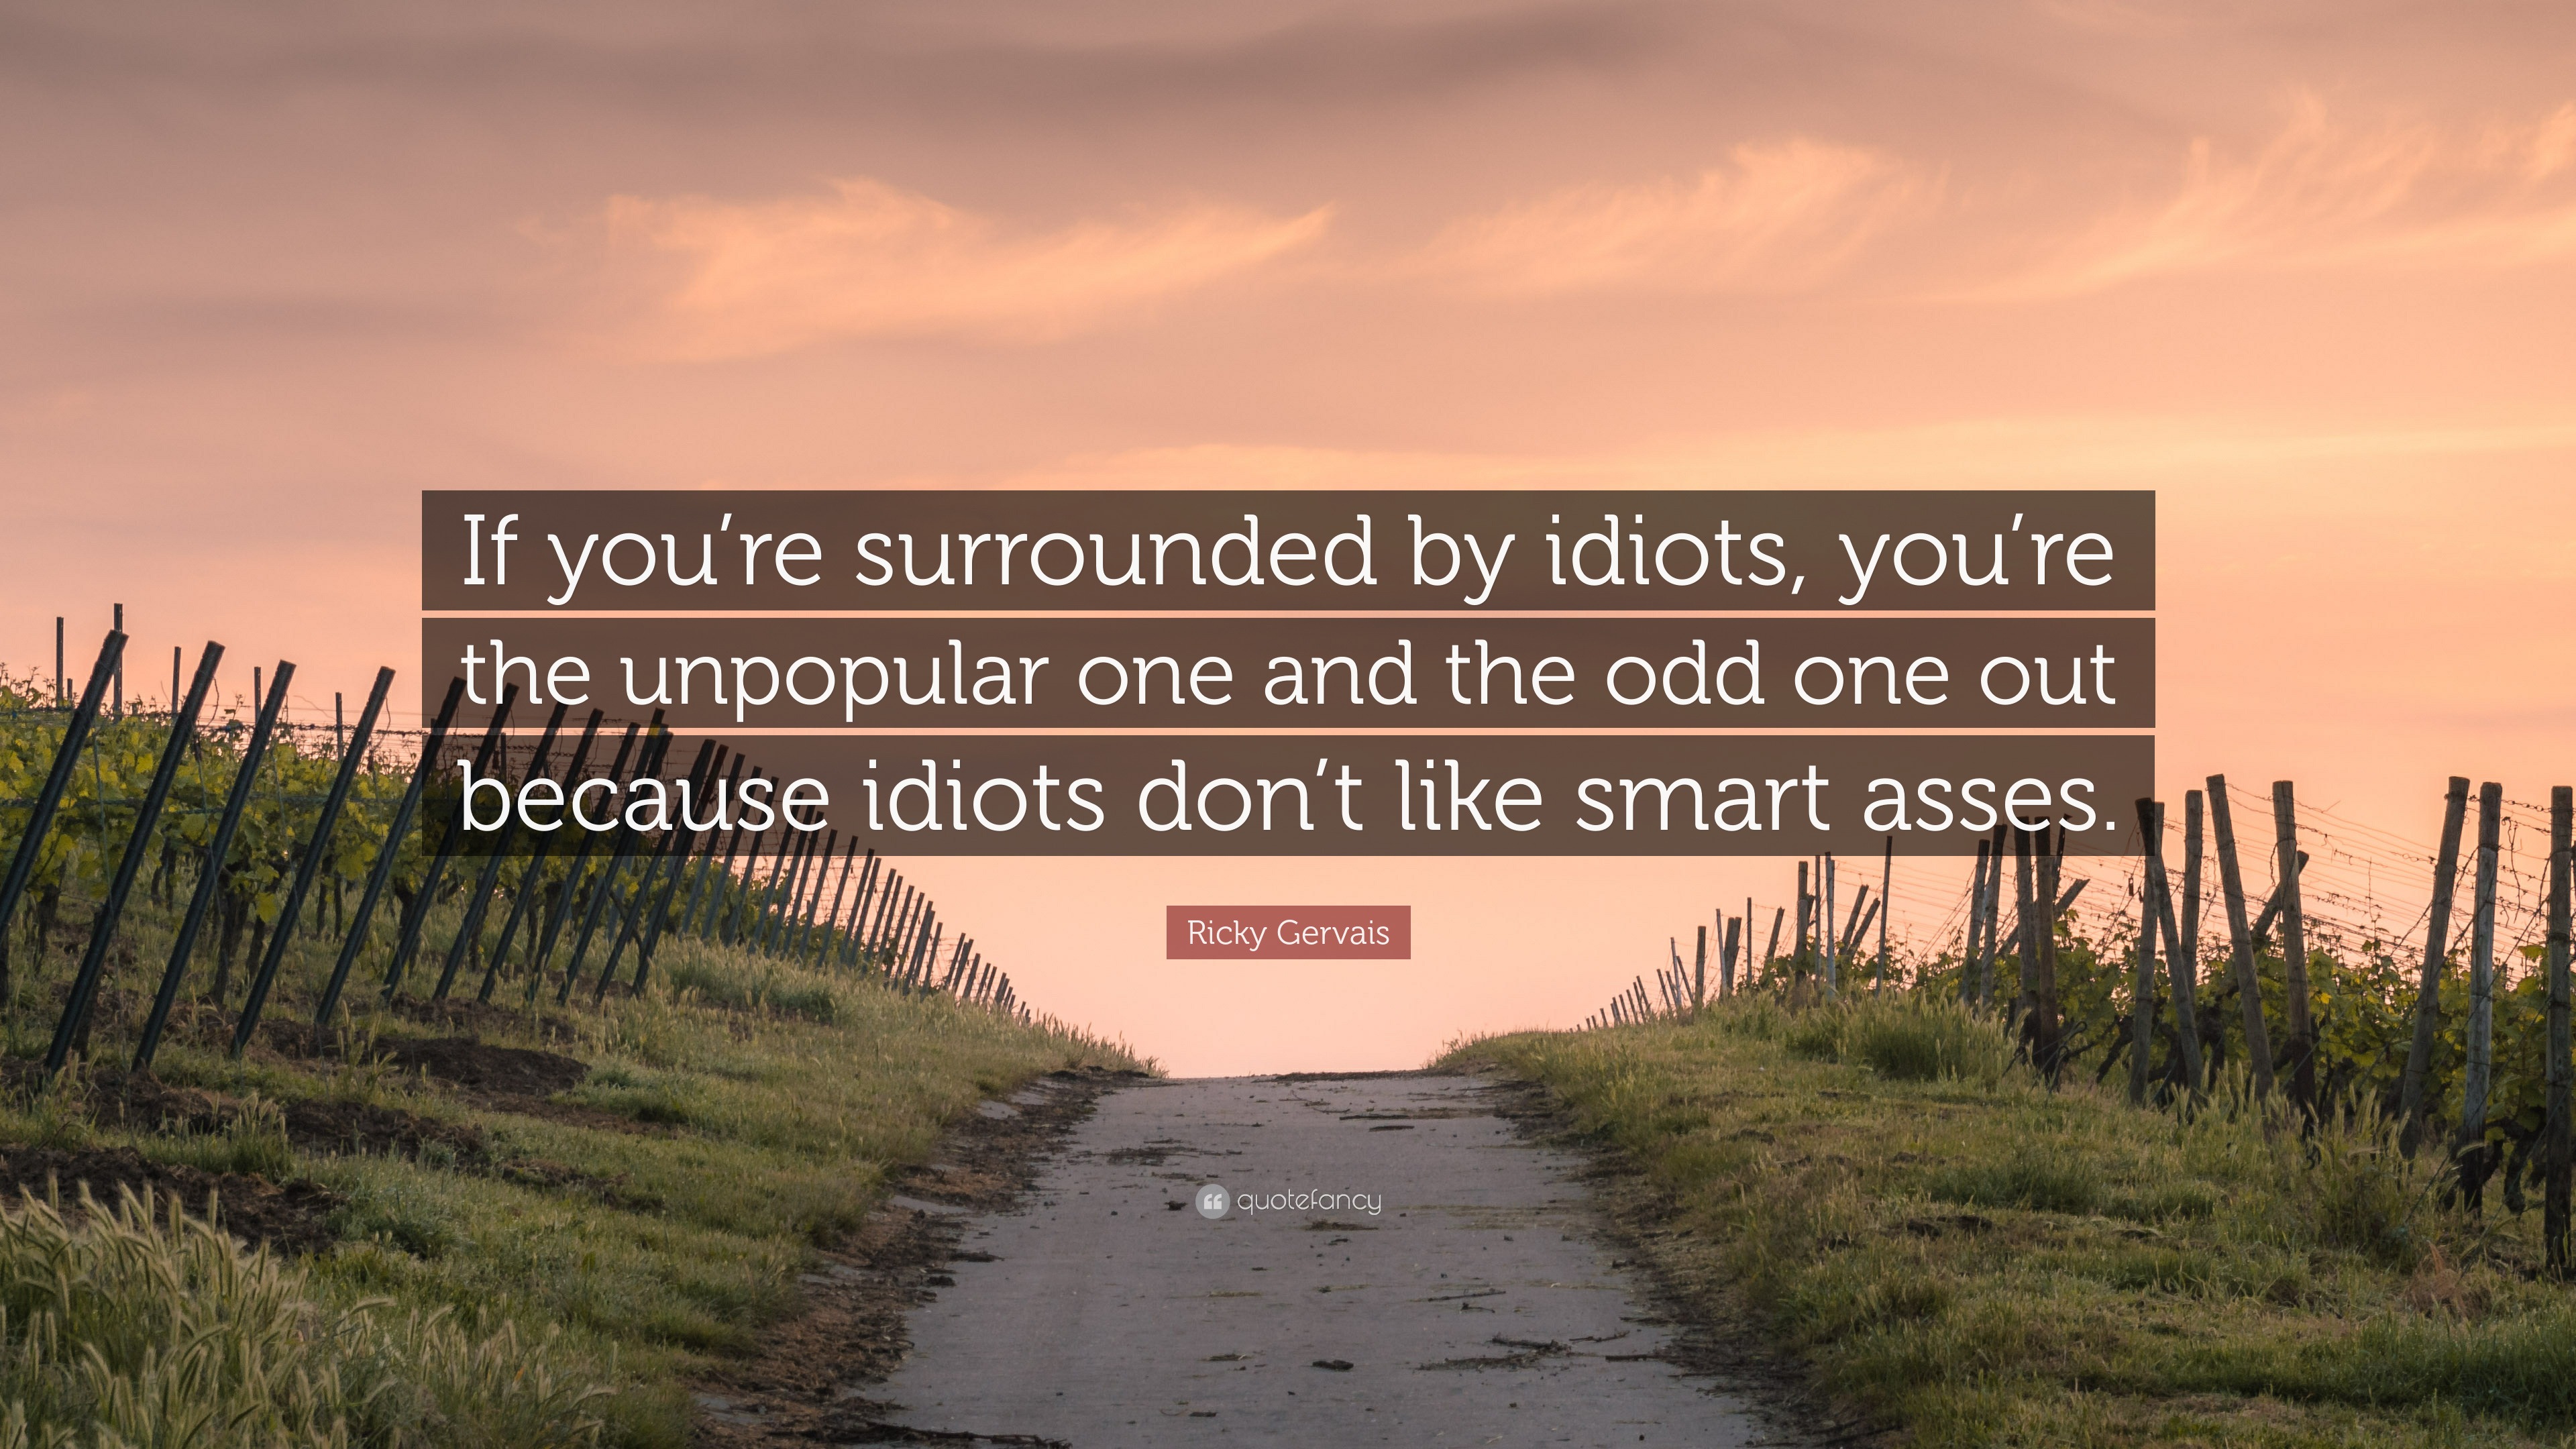 Surrounded By Idiots - What You Will Learn